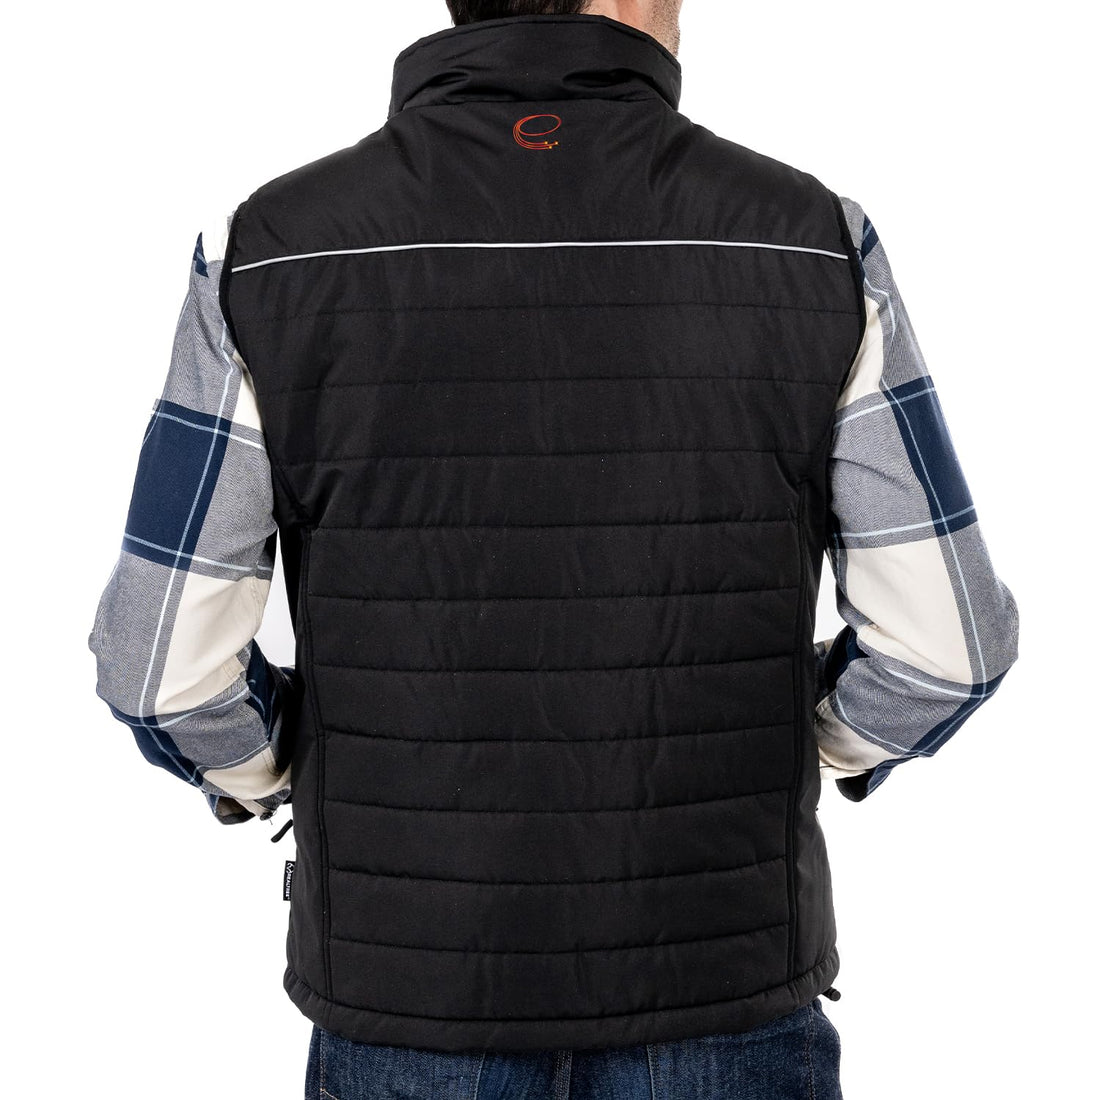 ENERGY TECHWEAR Men’s Quilted Heated Vest with 3 Heat Modules Slim &amp; Lightweight, with Power Bank, Bluetooth App &amp; Short Circuit Protection, Breathable, Waterproof, Windproof &amp; Washable